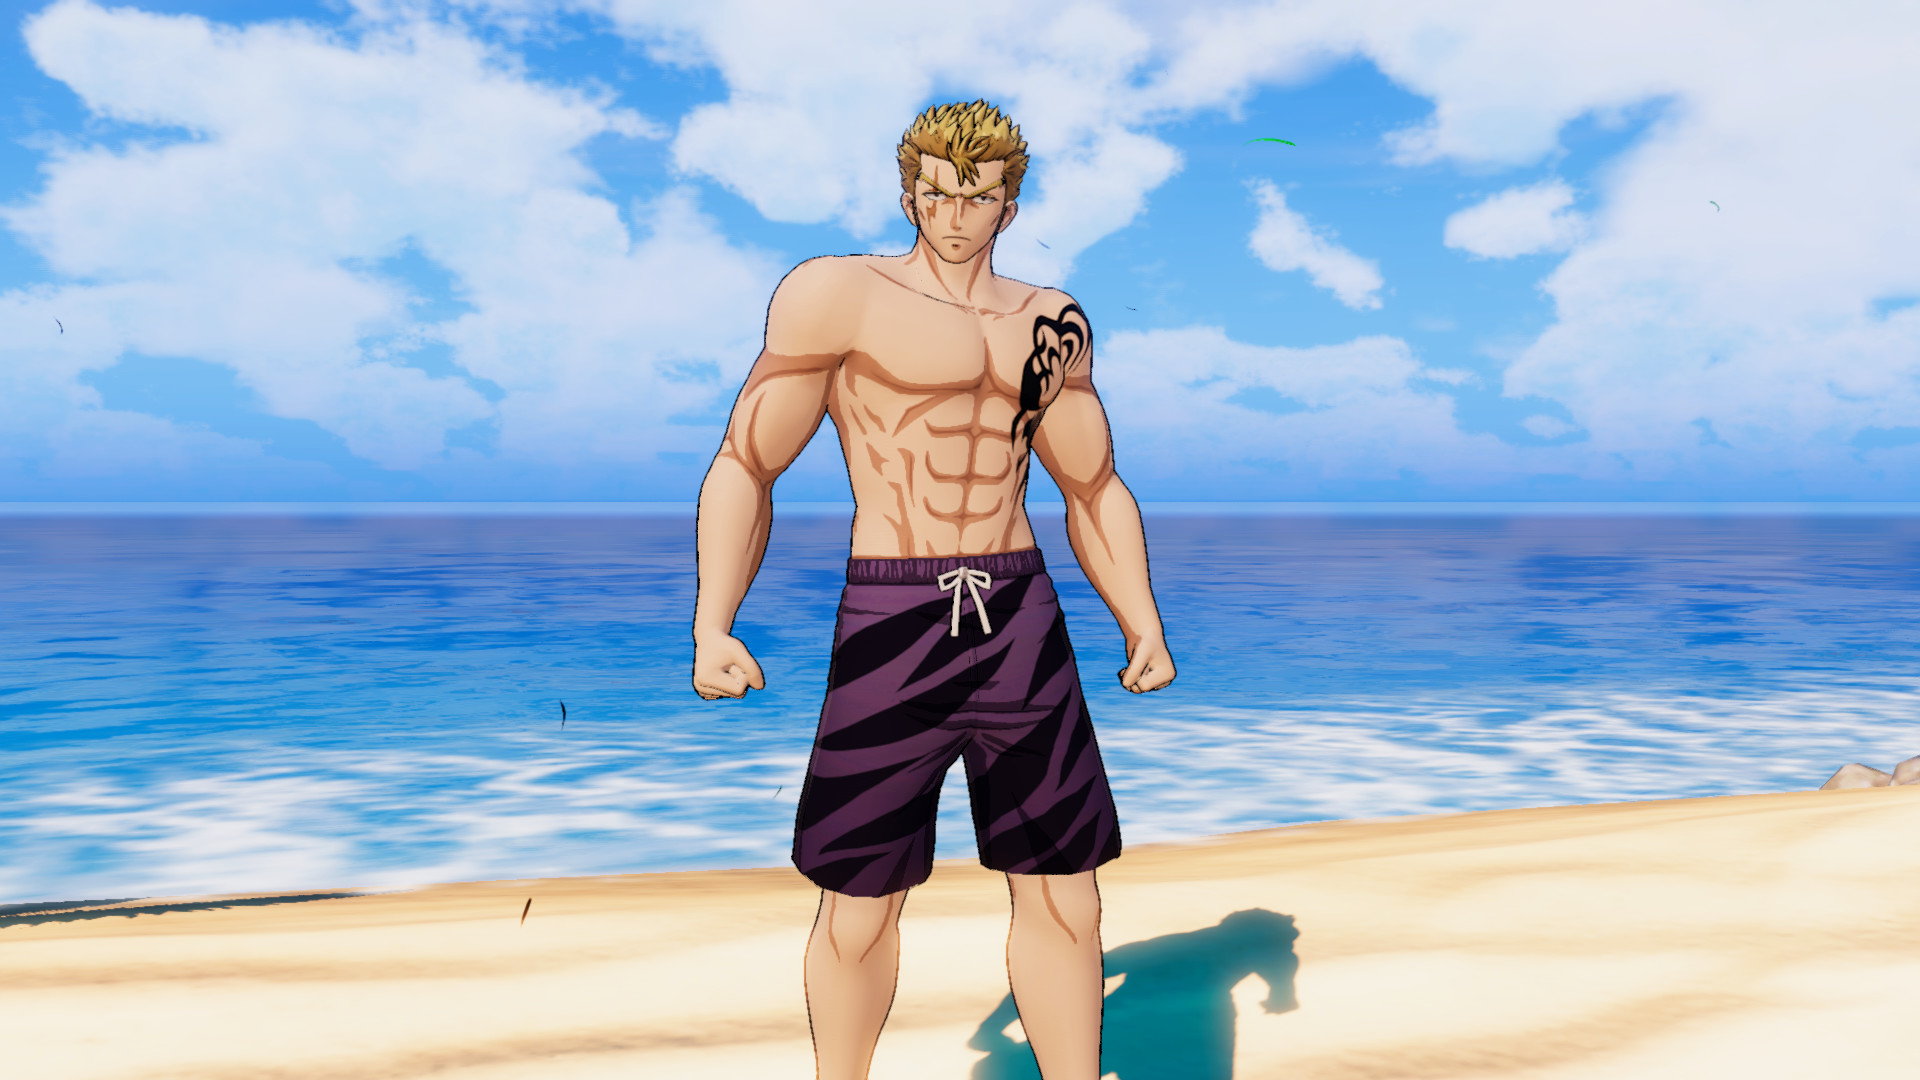 FAIRY TAIL: Laxus's Costume "Special Swimsuit" screenshot